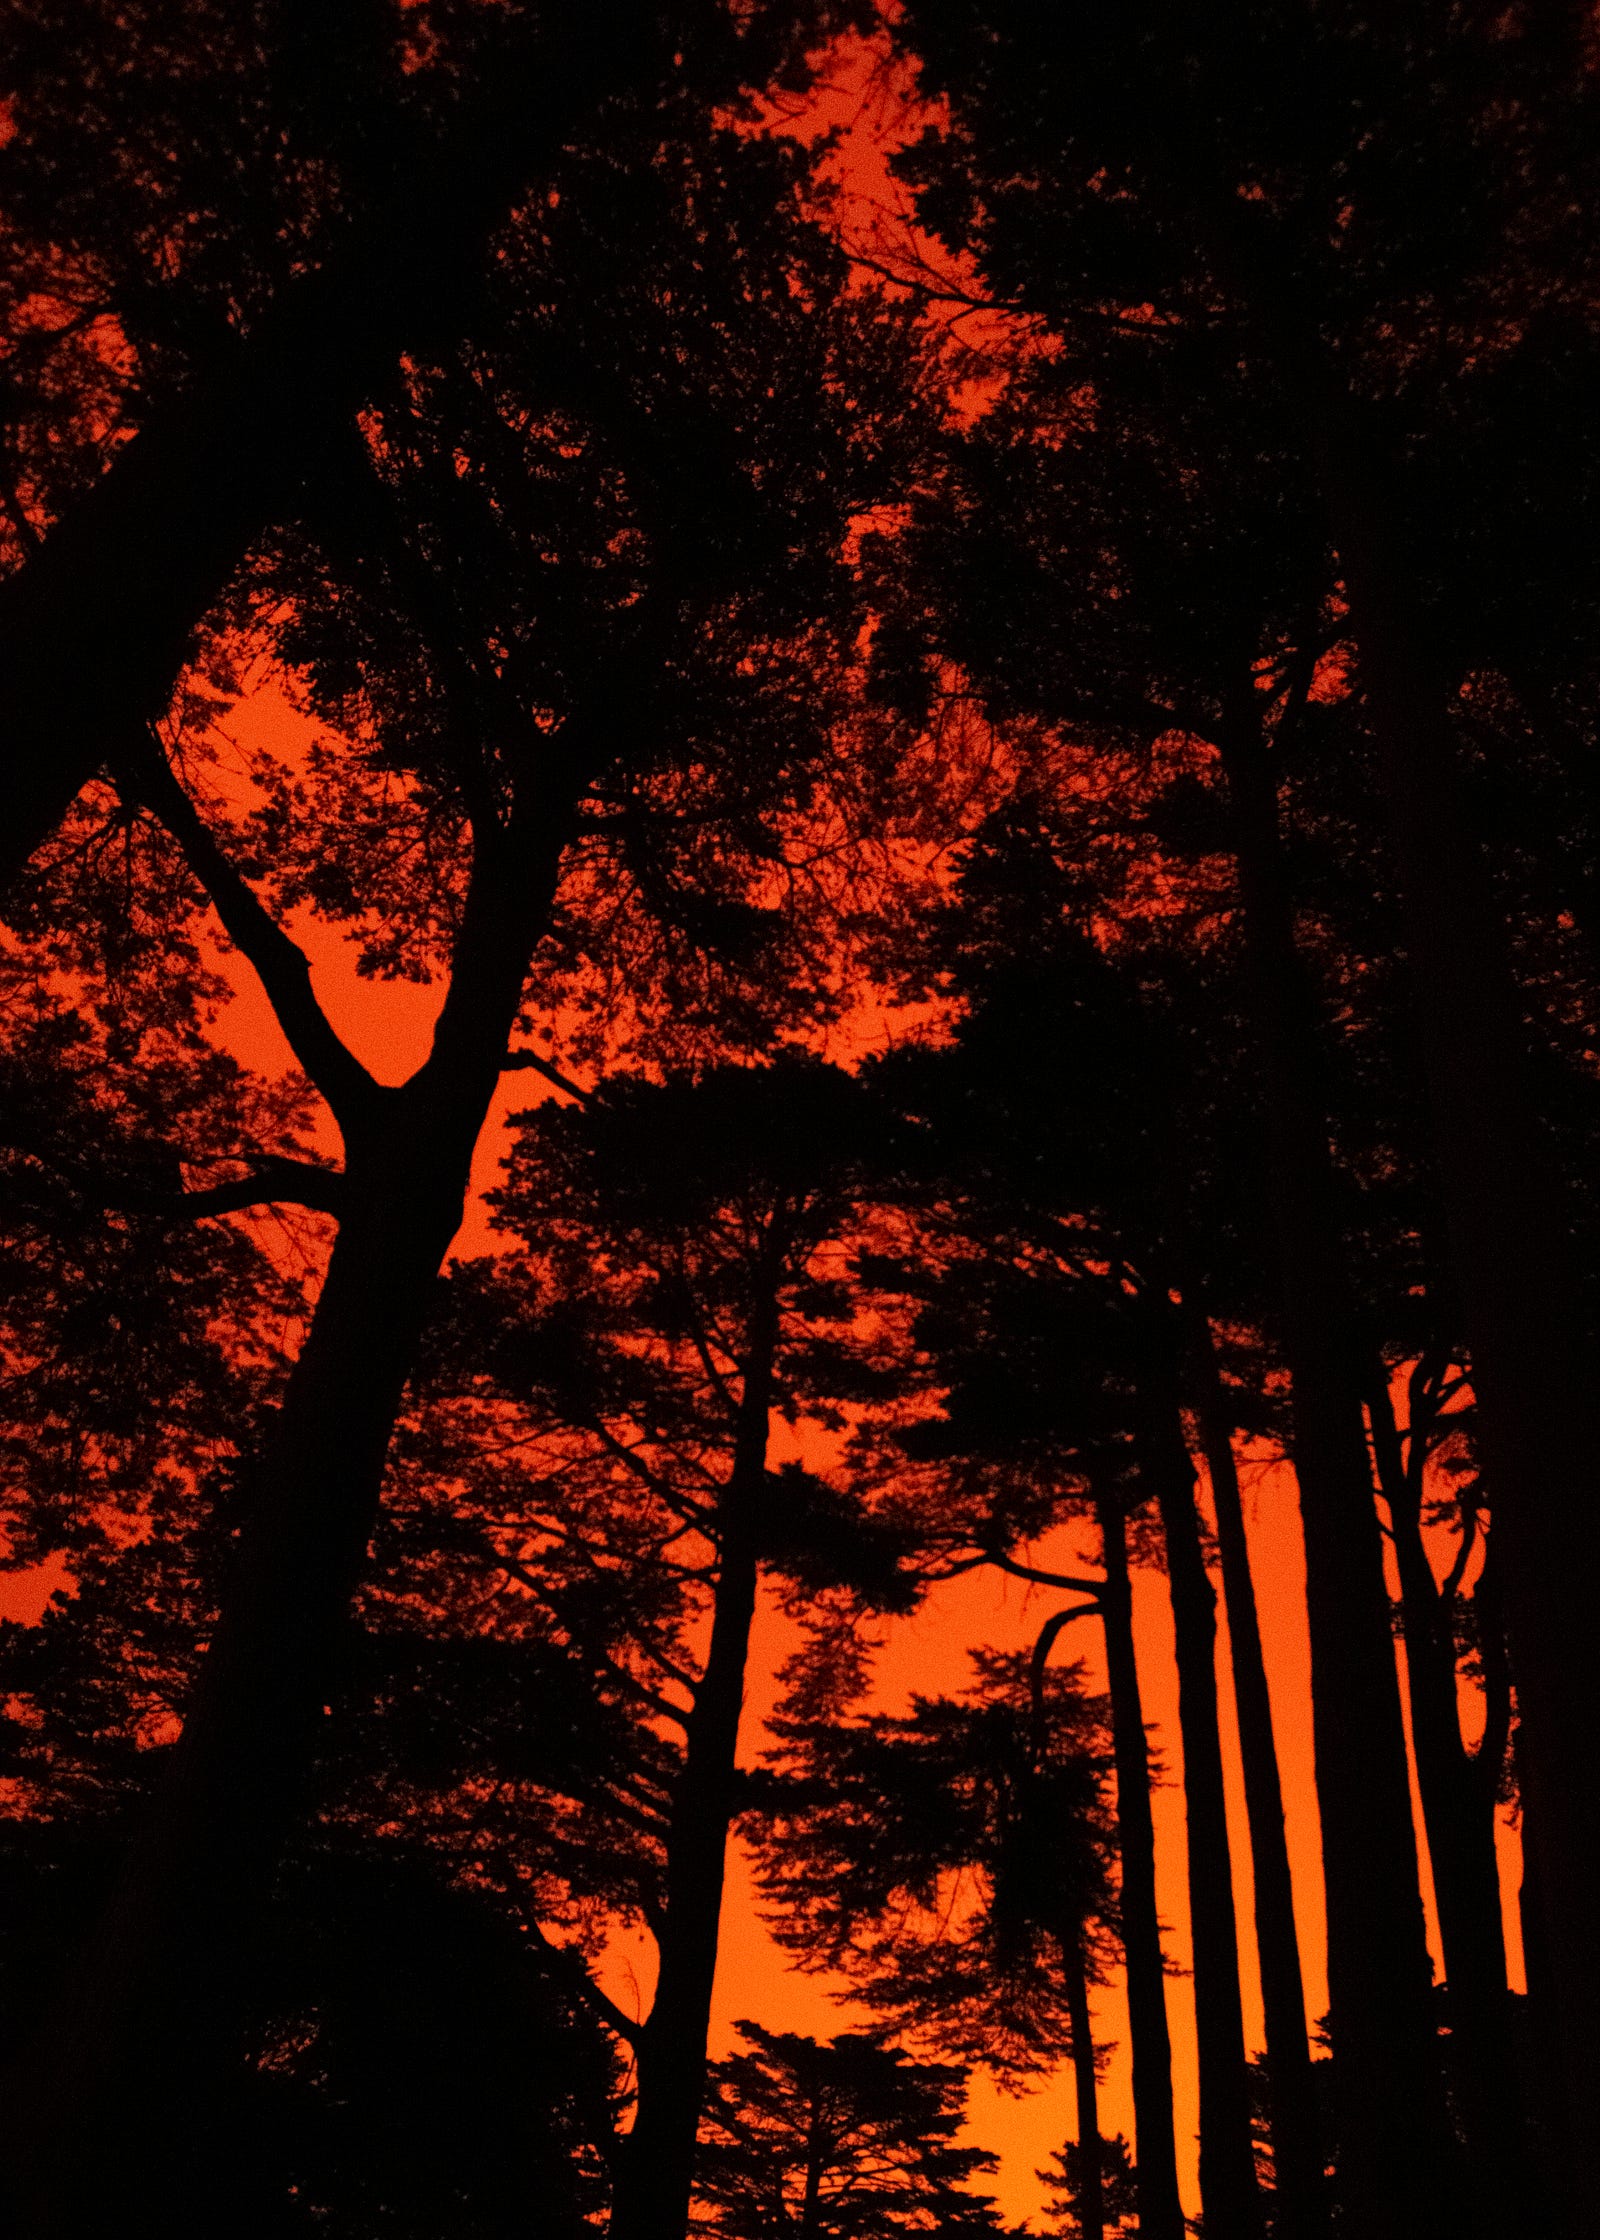 A wildfire turns the sky orange. The view is from below several trees. Canada’s wildfires are a harbinger of our climate future, experts explain.